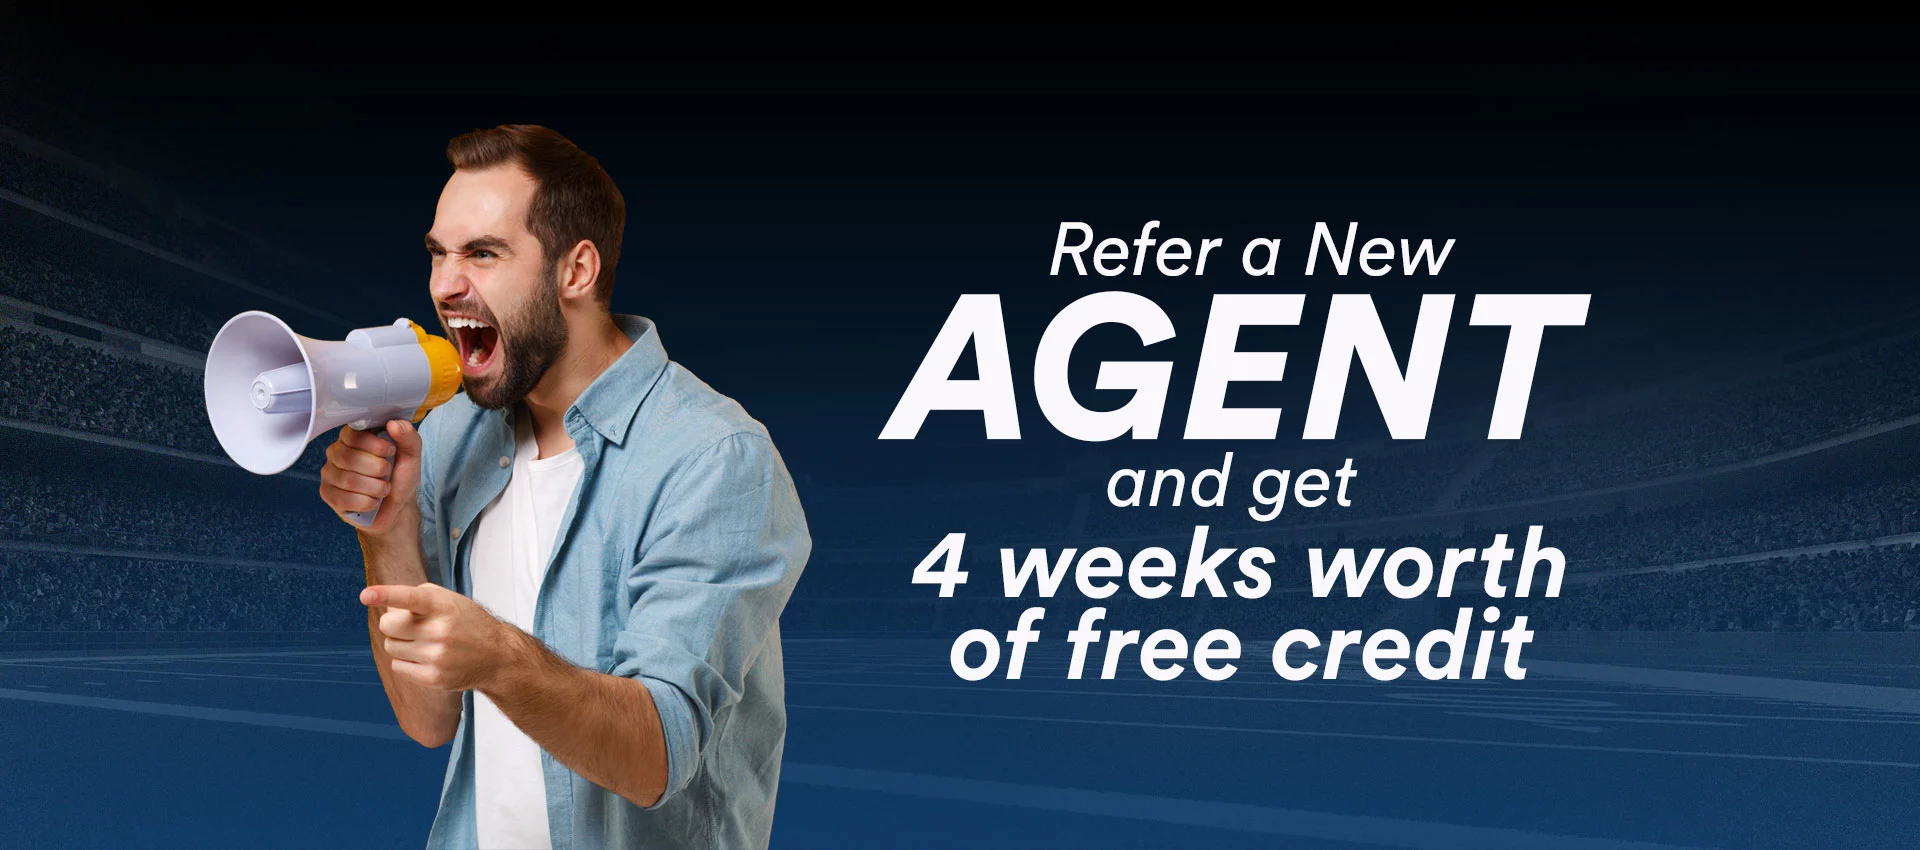 Refer a New Agent